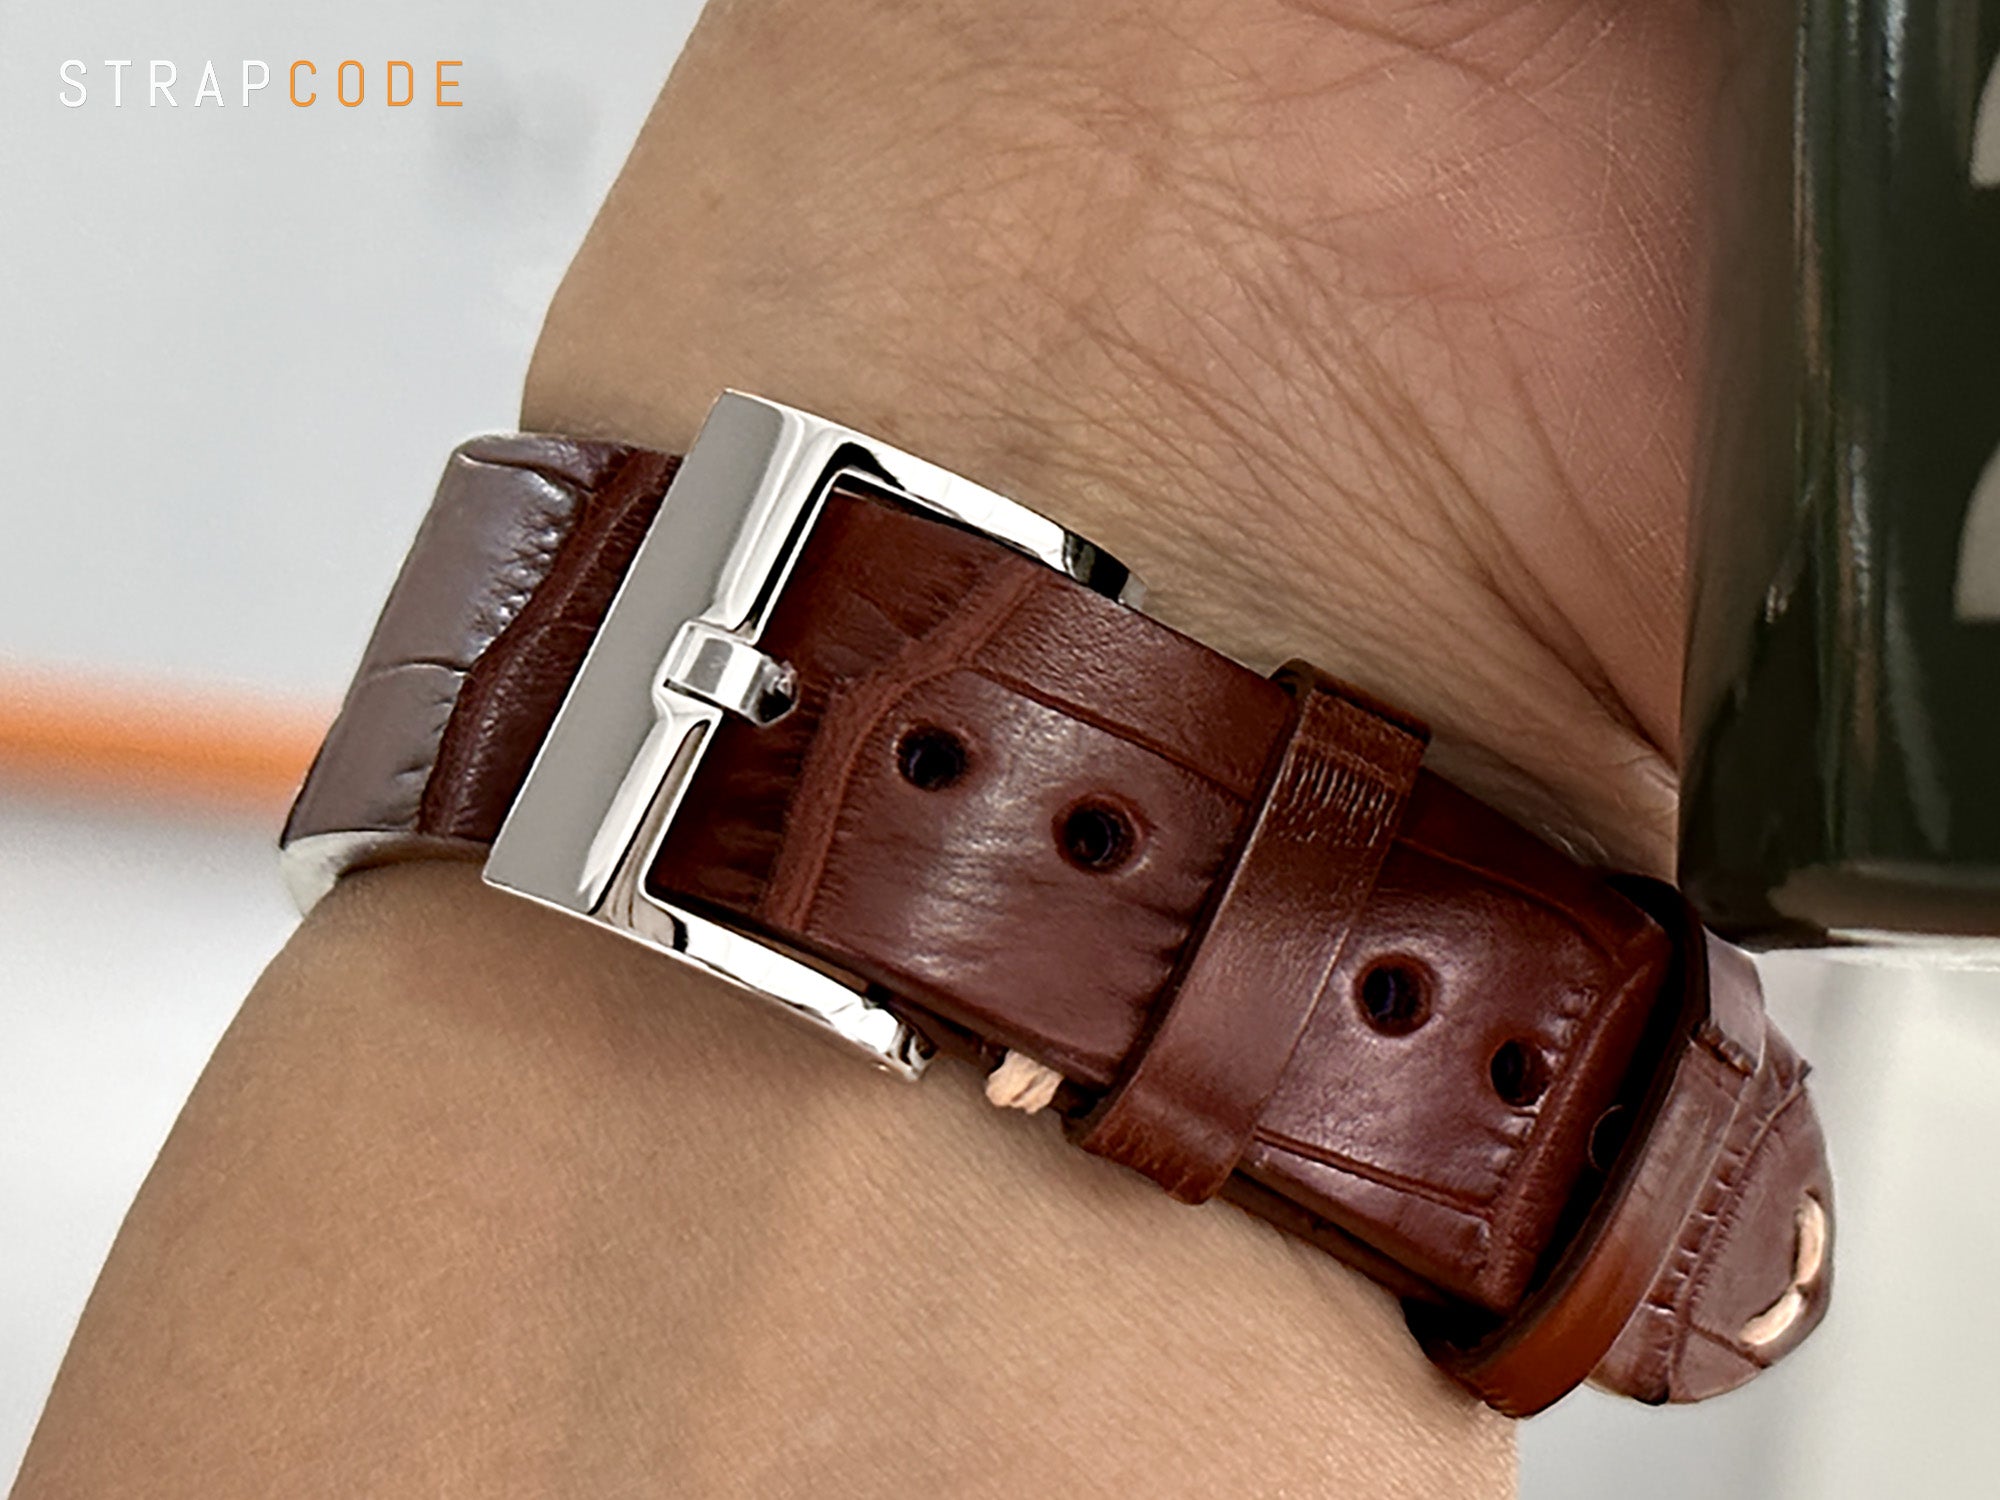 A nice and properly-fitted watch buckle is an essential component of any watch.